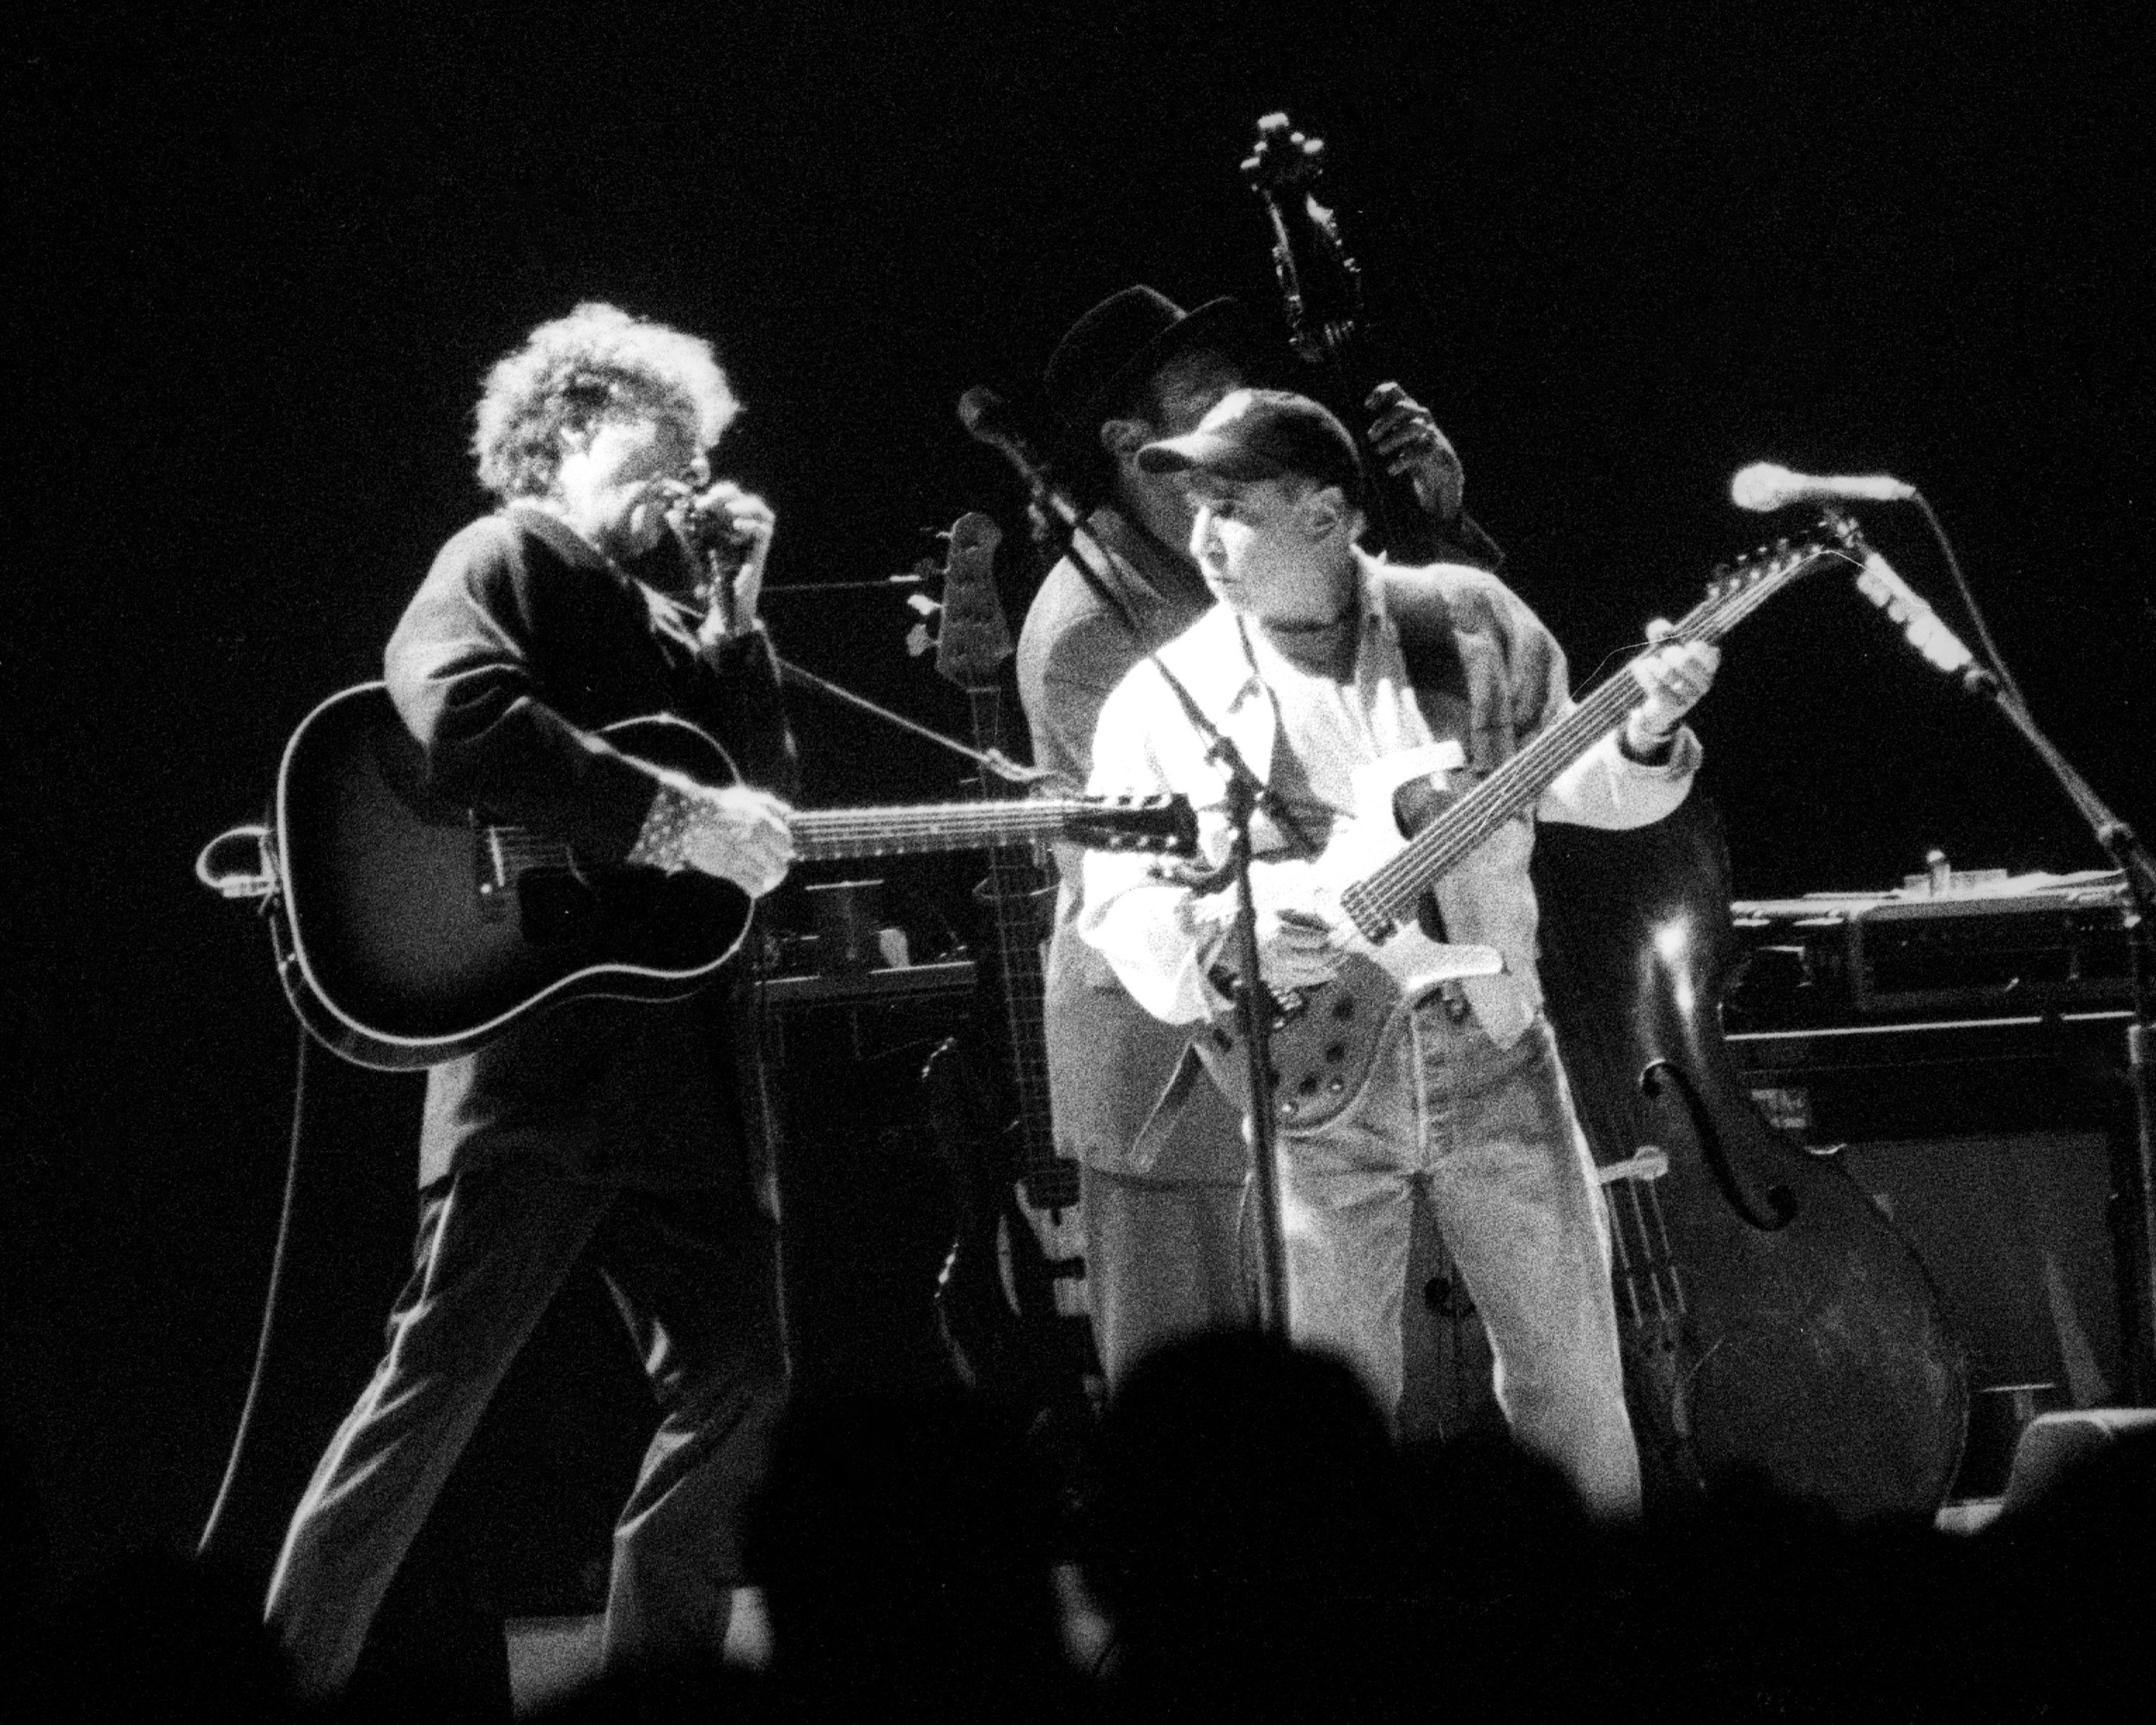 A black and white picture of Bob Dylan and Paul Simon holding guitars on stage together.